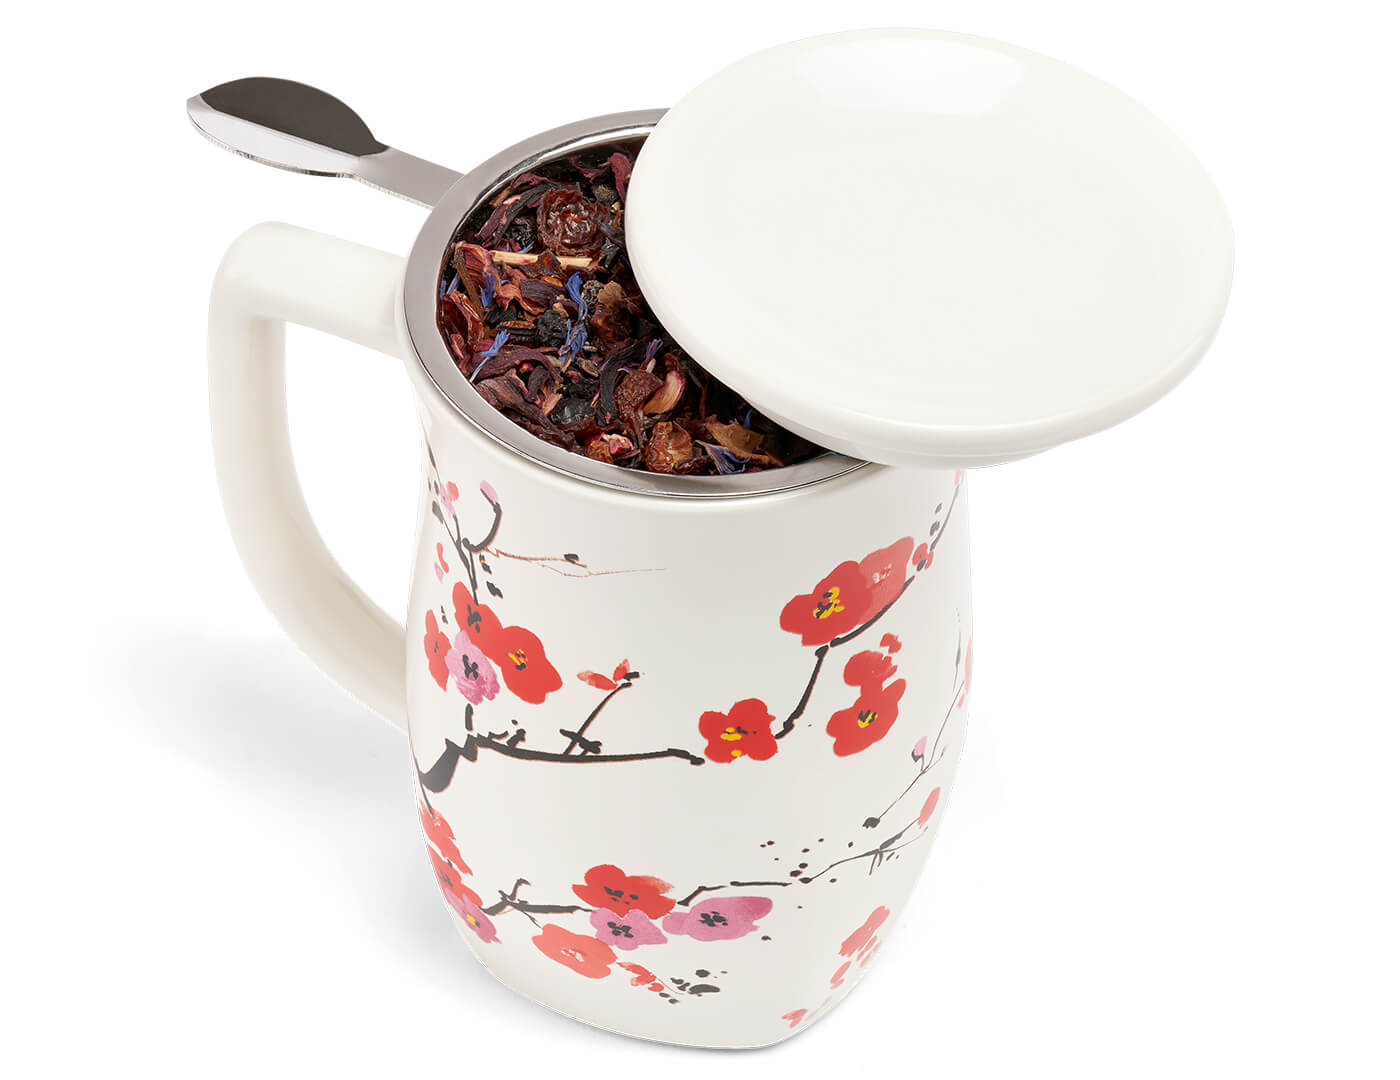 Fiore Sakura Steeping Cup with lid and infuser, shown from above